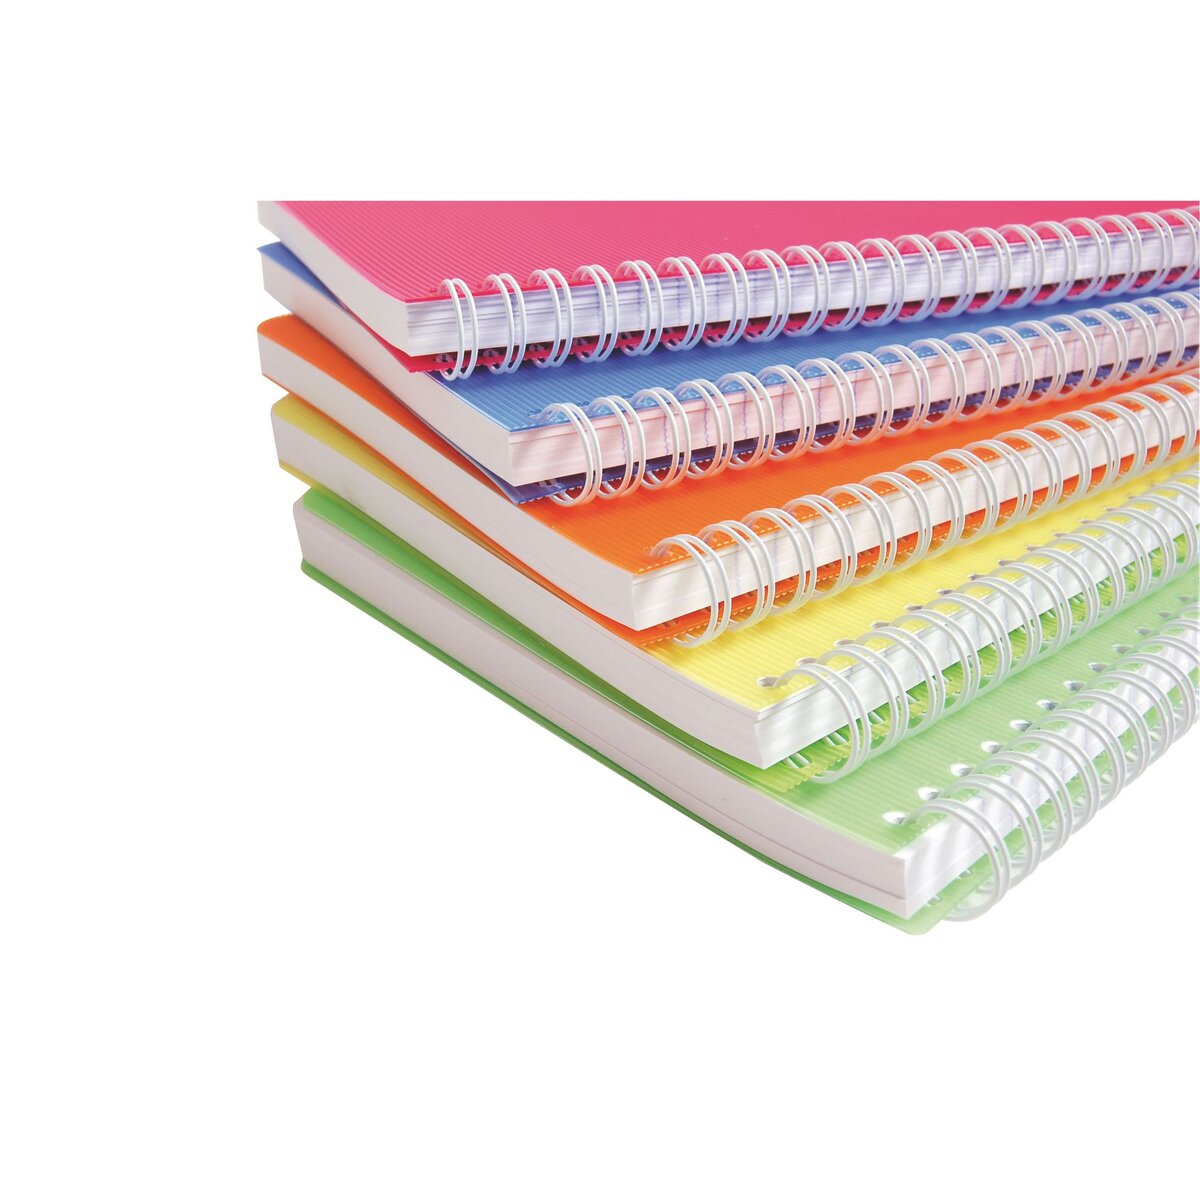 CAHIER REPERTOIRE 148/210mm SPIRALE Q5 90 FEUILLES CLAIREFONTAINE